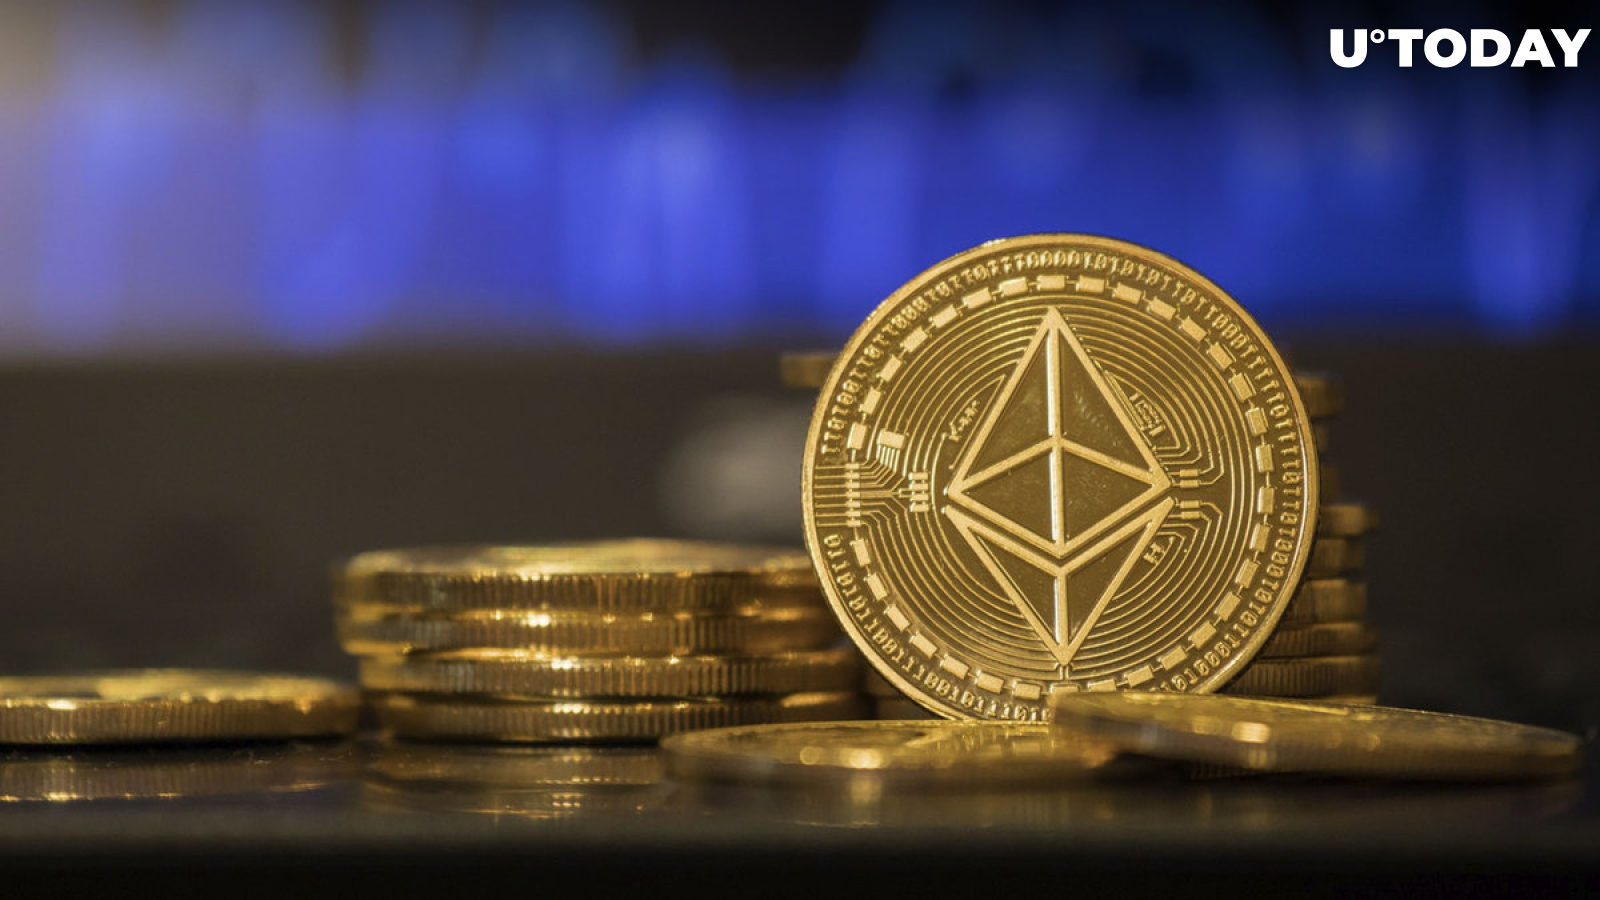 Ethereum Price to Surge Massively, Suggests This ETH Chart